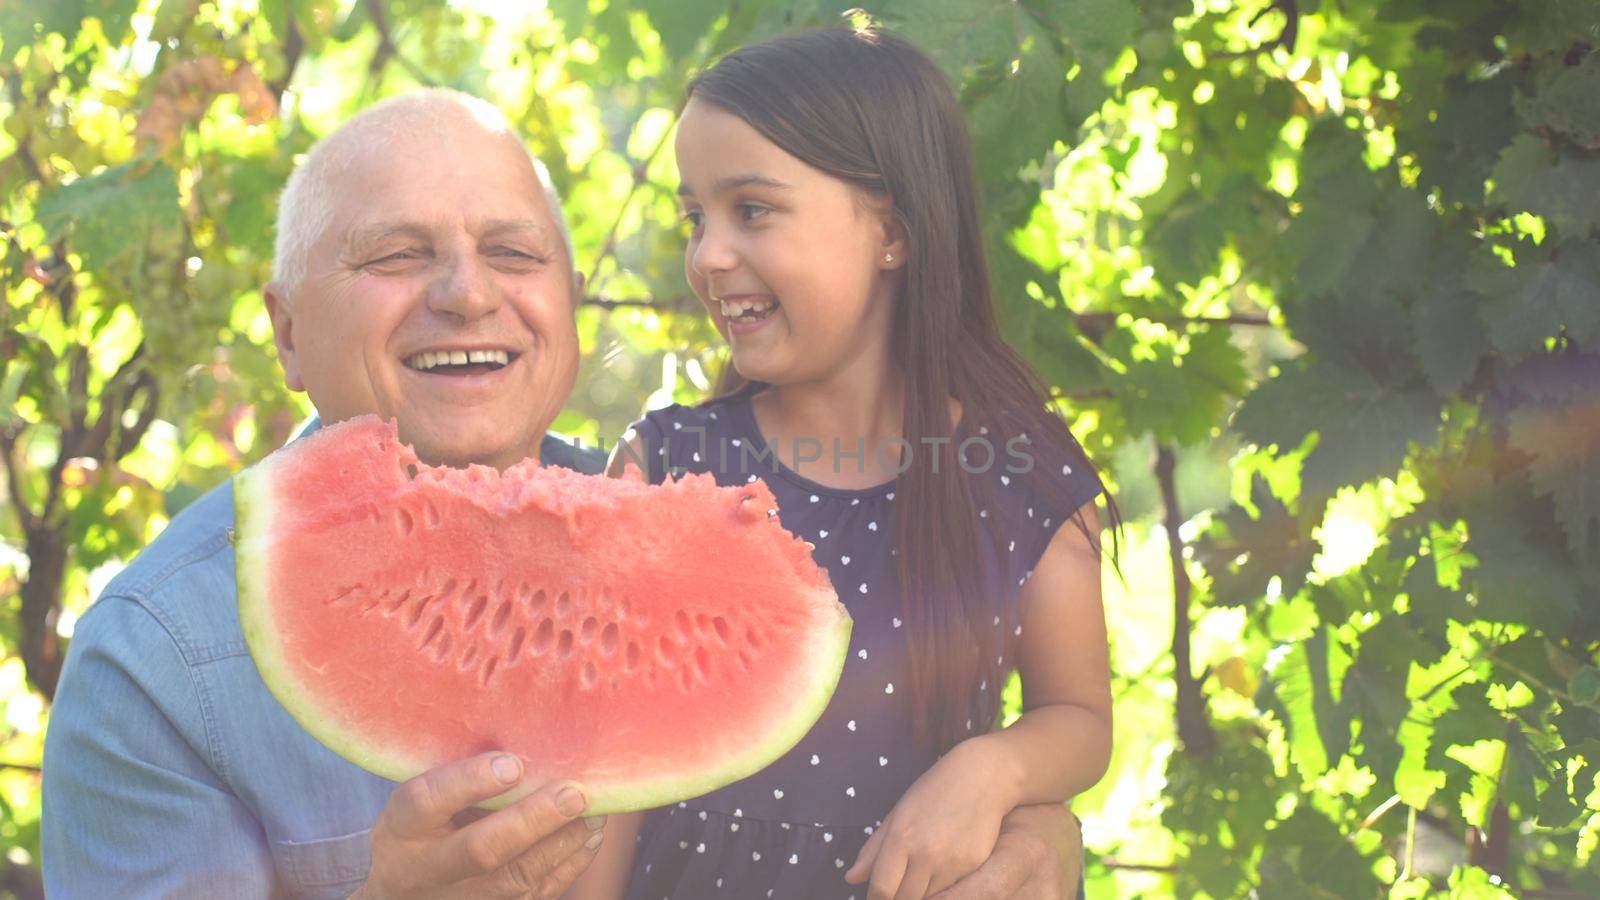 little girl and grandfather with watermelon smile and eat